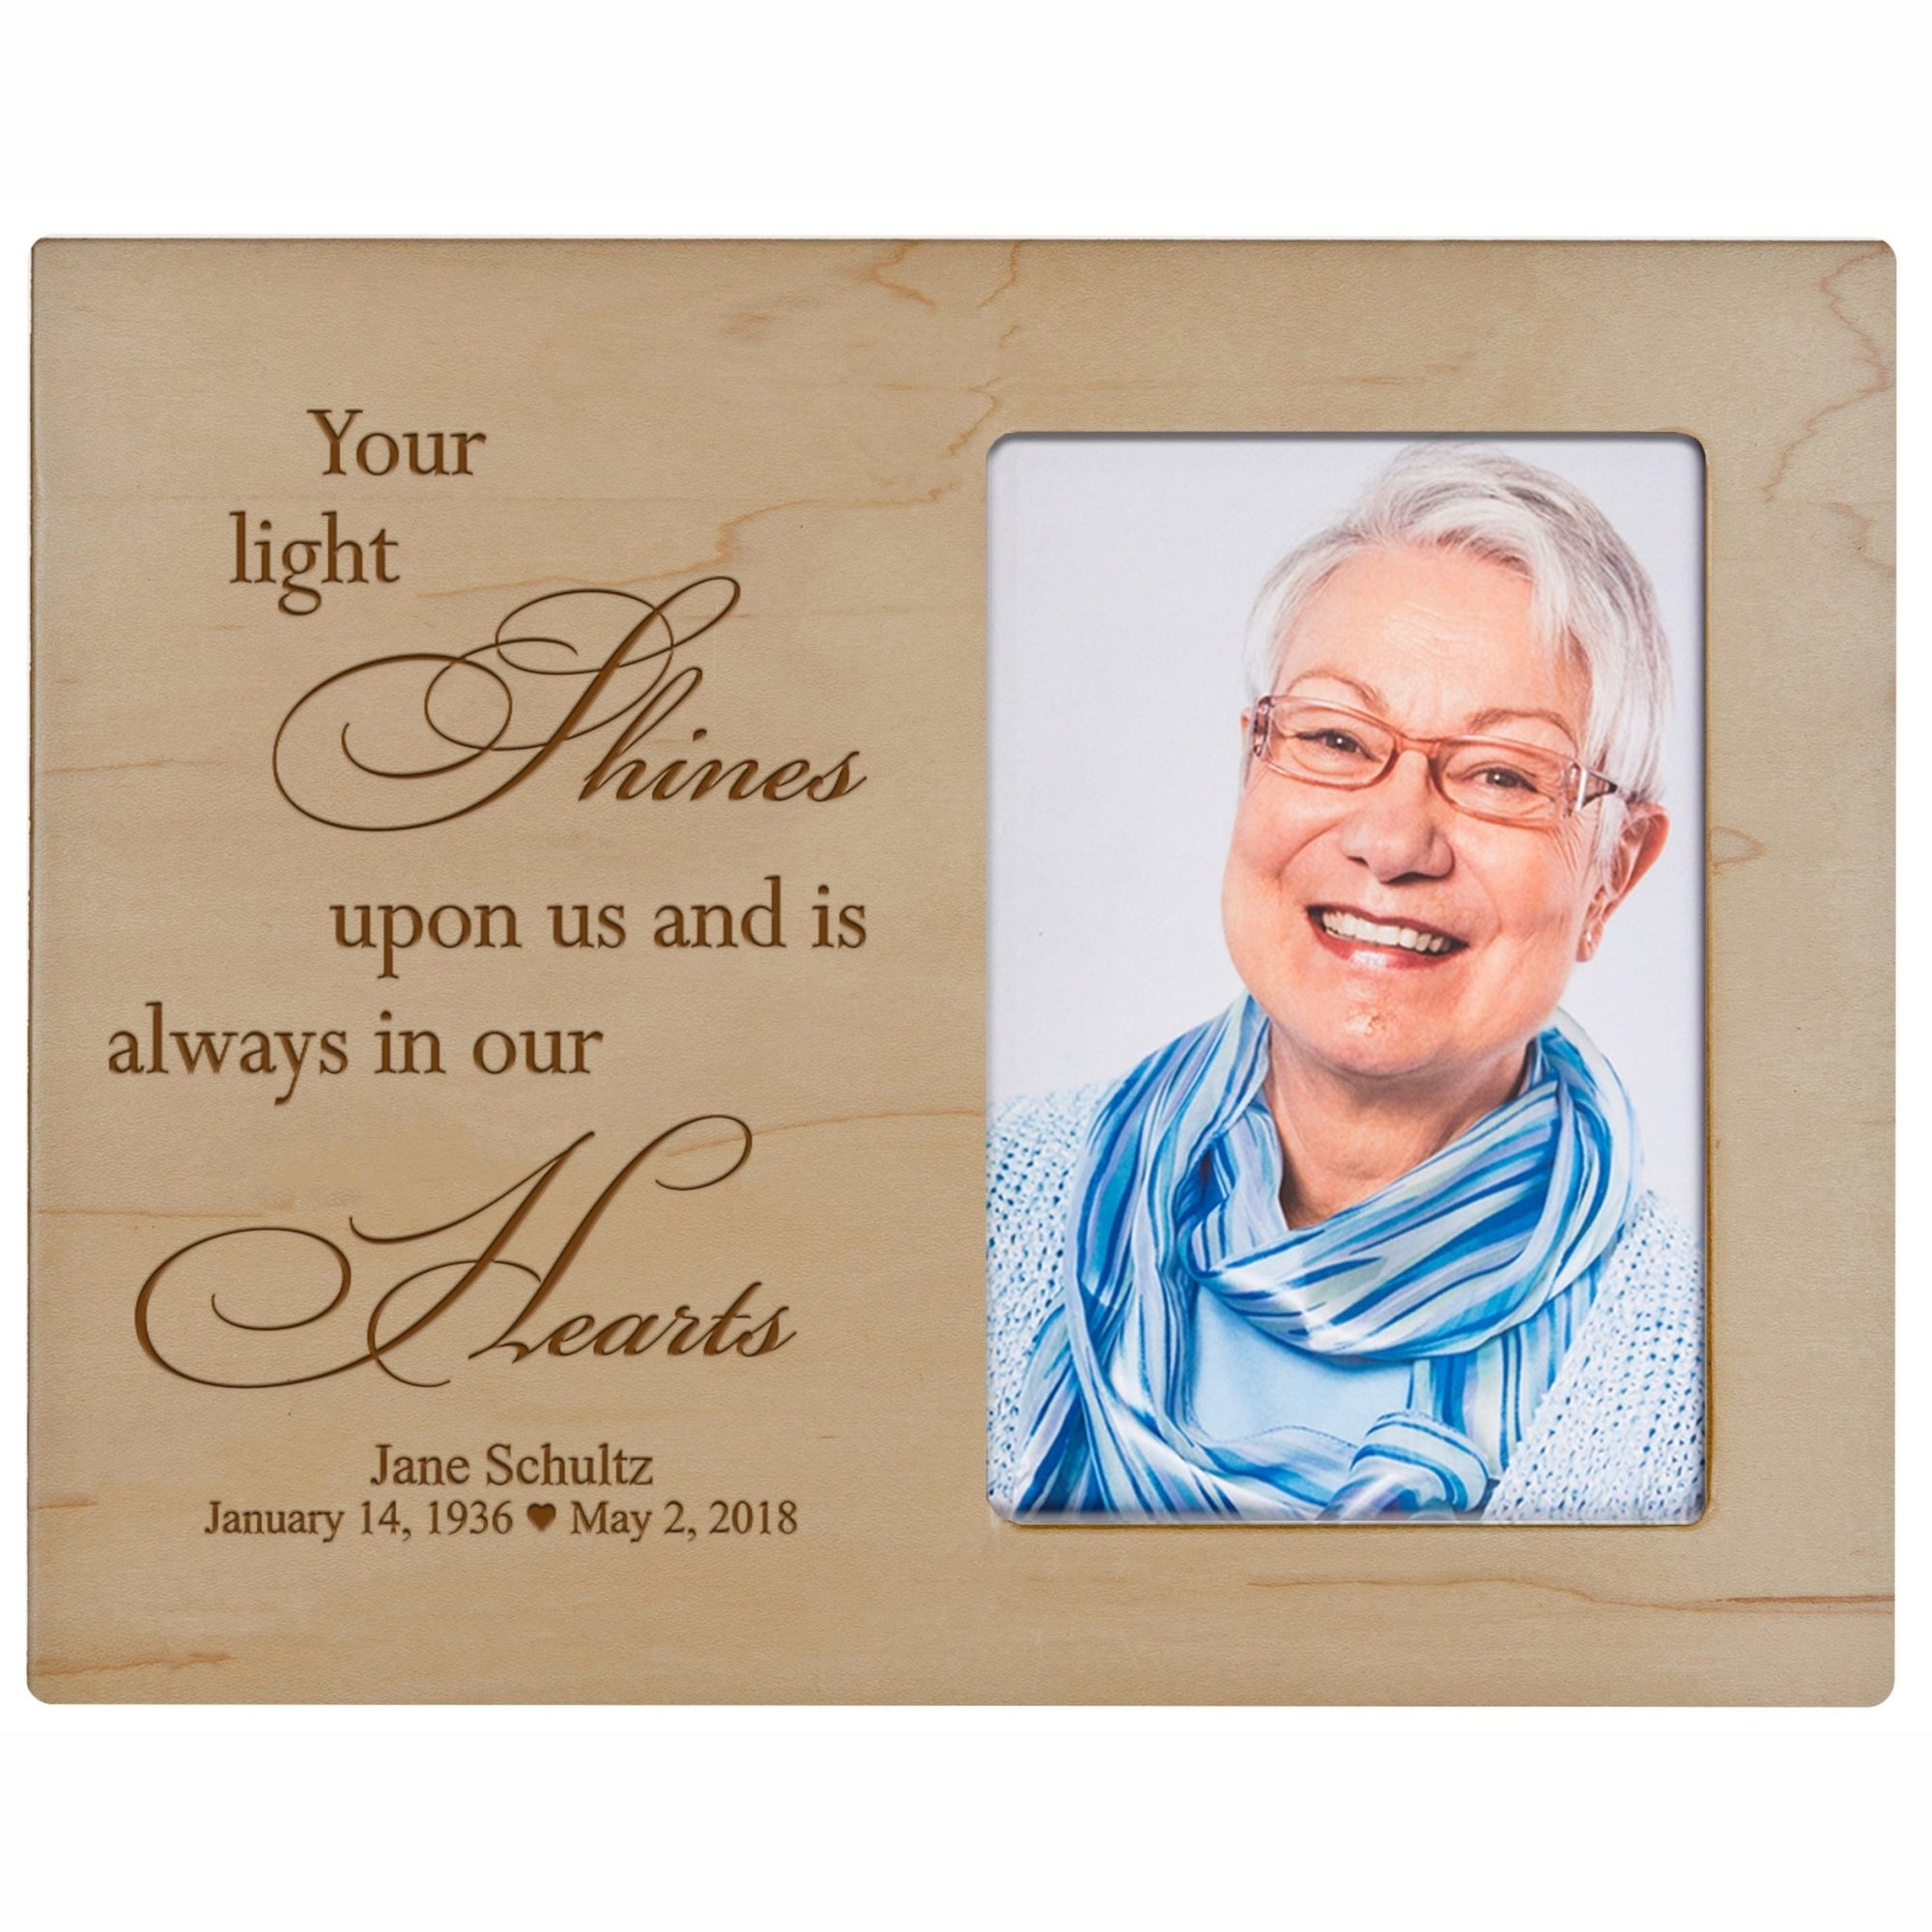 Personalized Horizontal 8x10 Wooden Memorial Picture Frame Holds 4x6 Photo - Your Light Shines - LifeSong Milestones